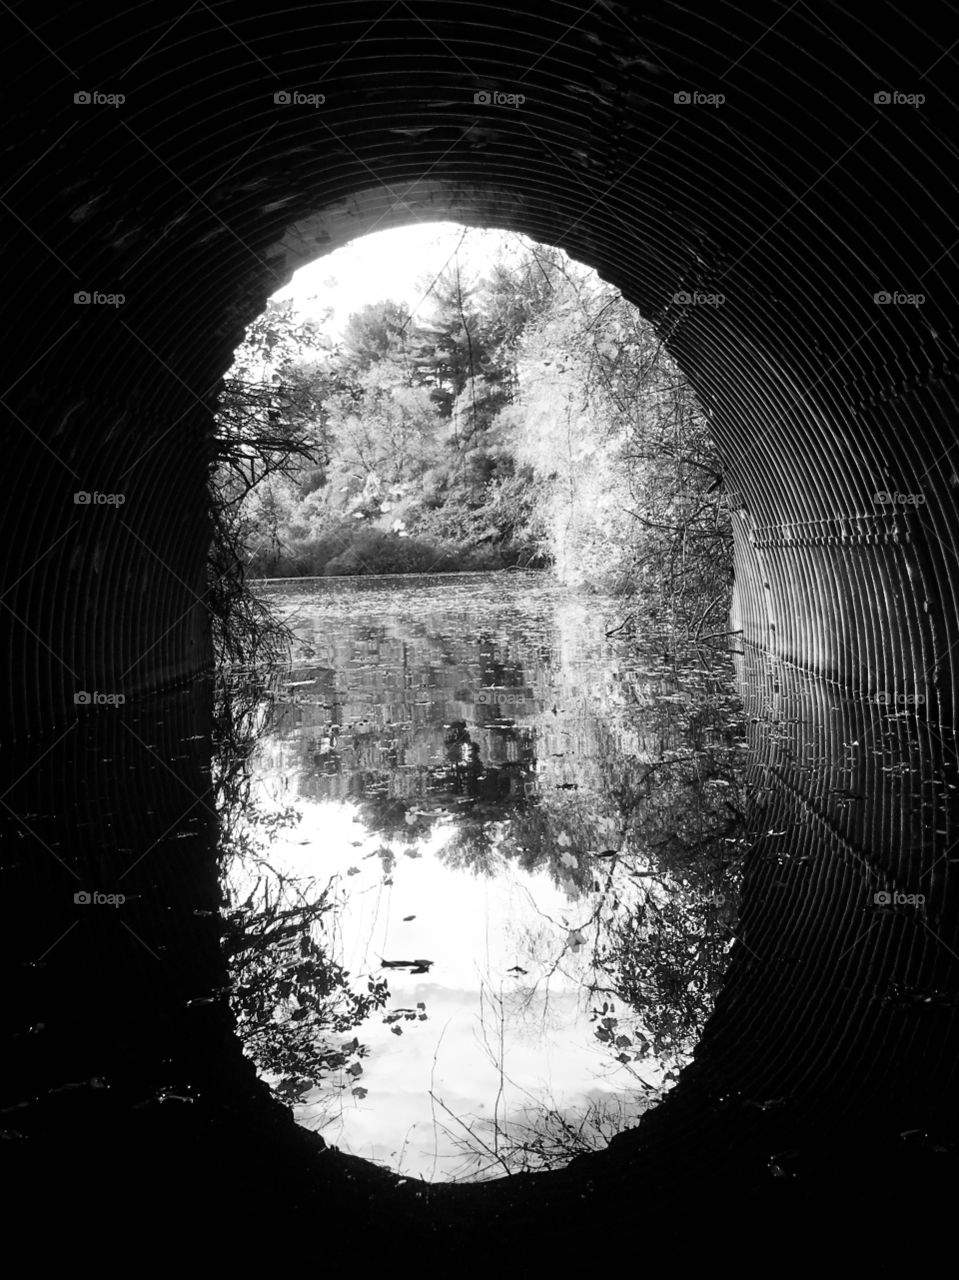 Reflections through a dark watery tunnel.